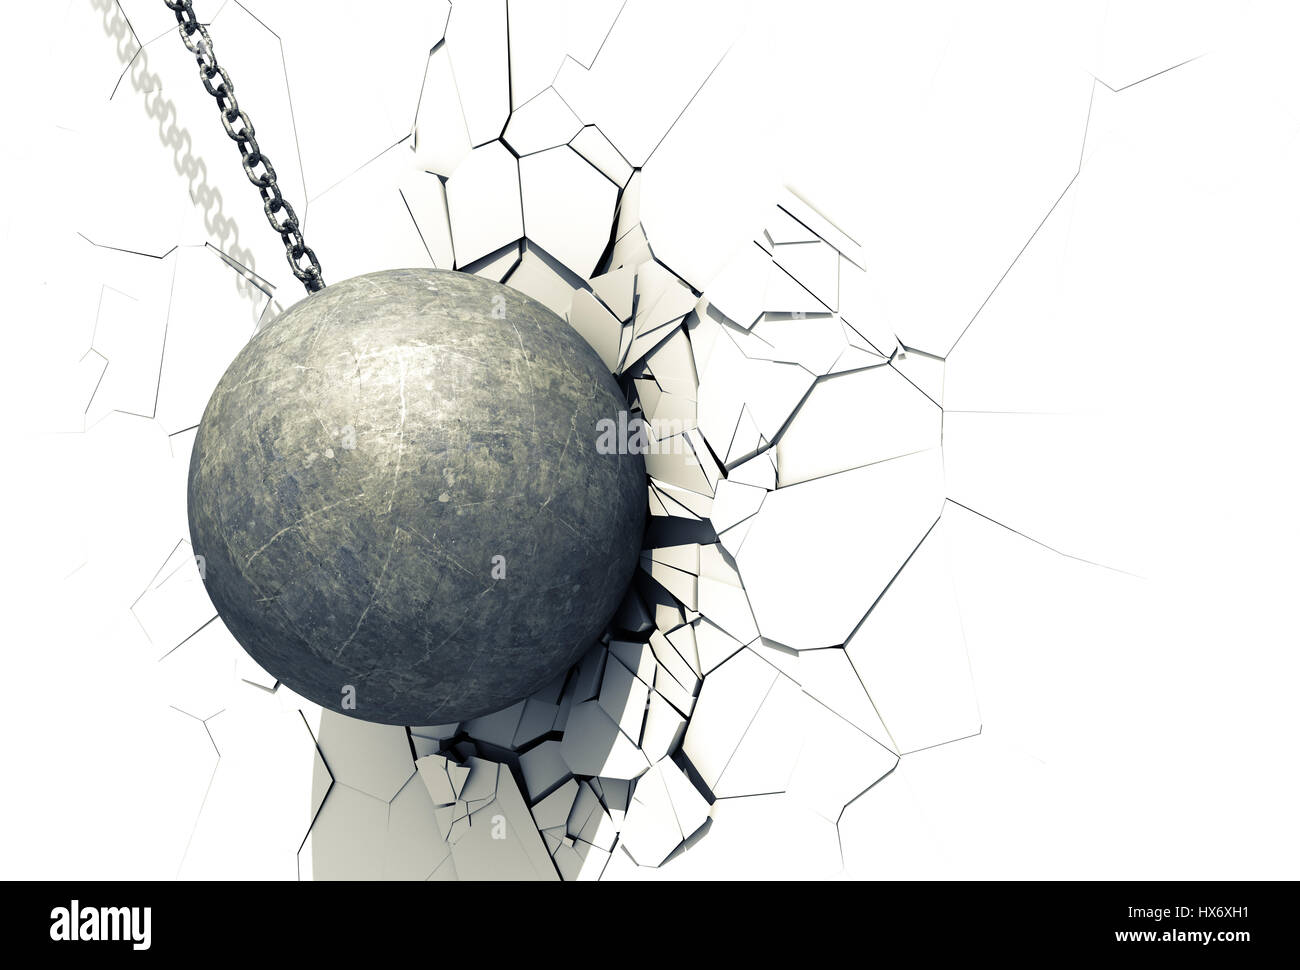 Wrecking Ball Shattering The White Wall. 3D Illustration. Stock Photo